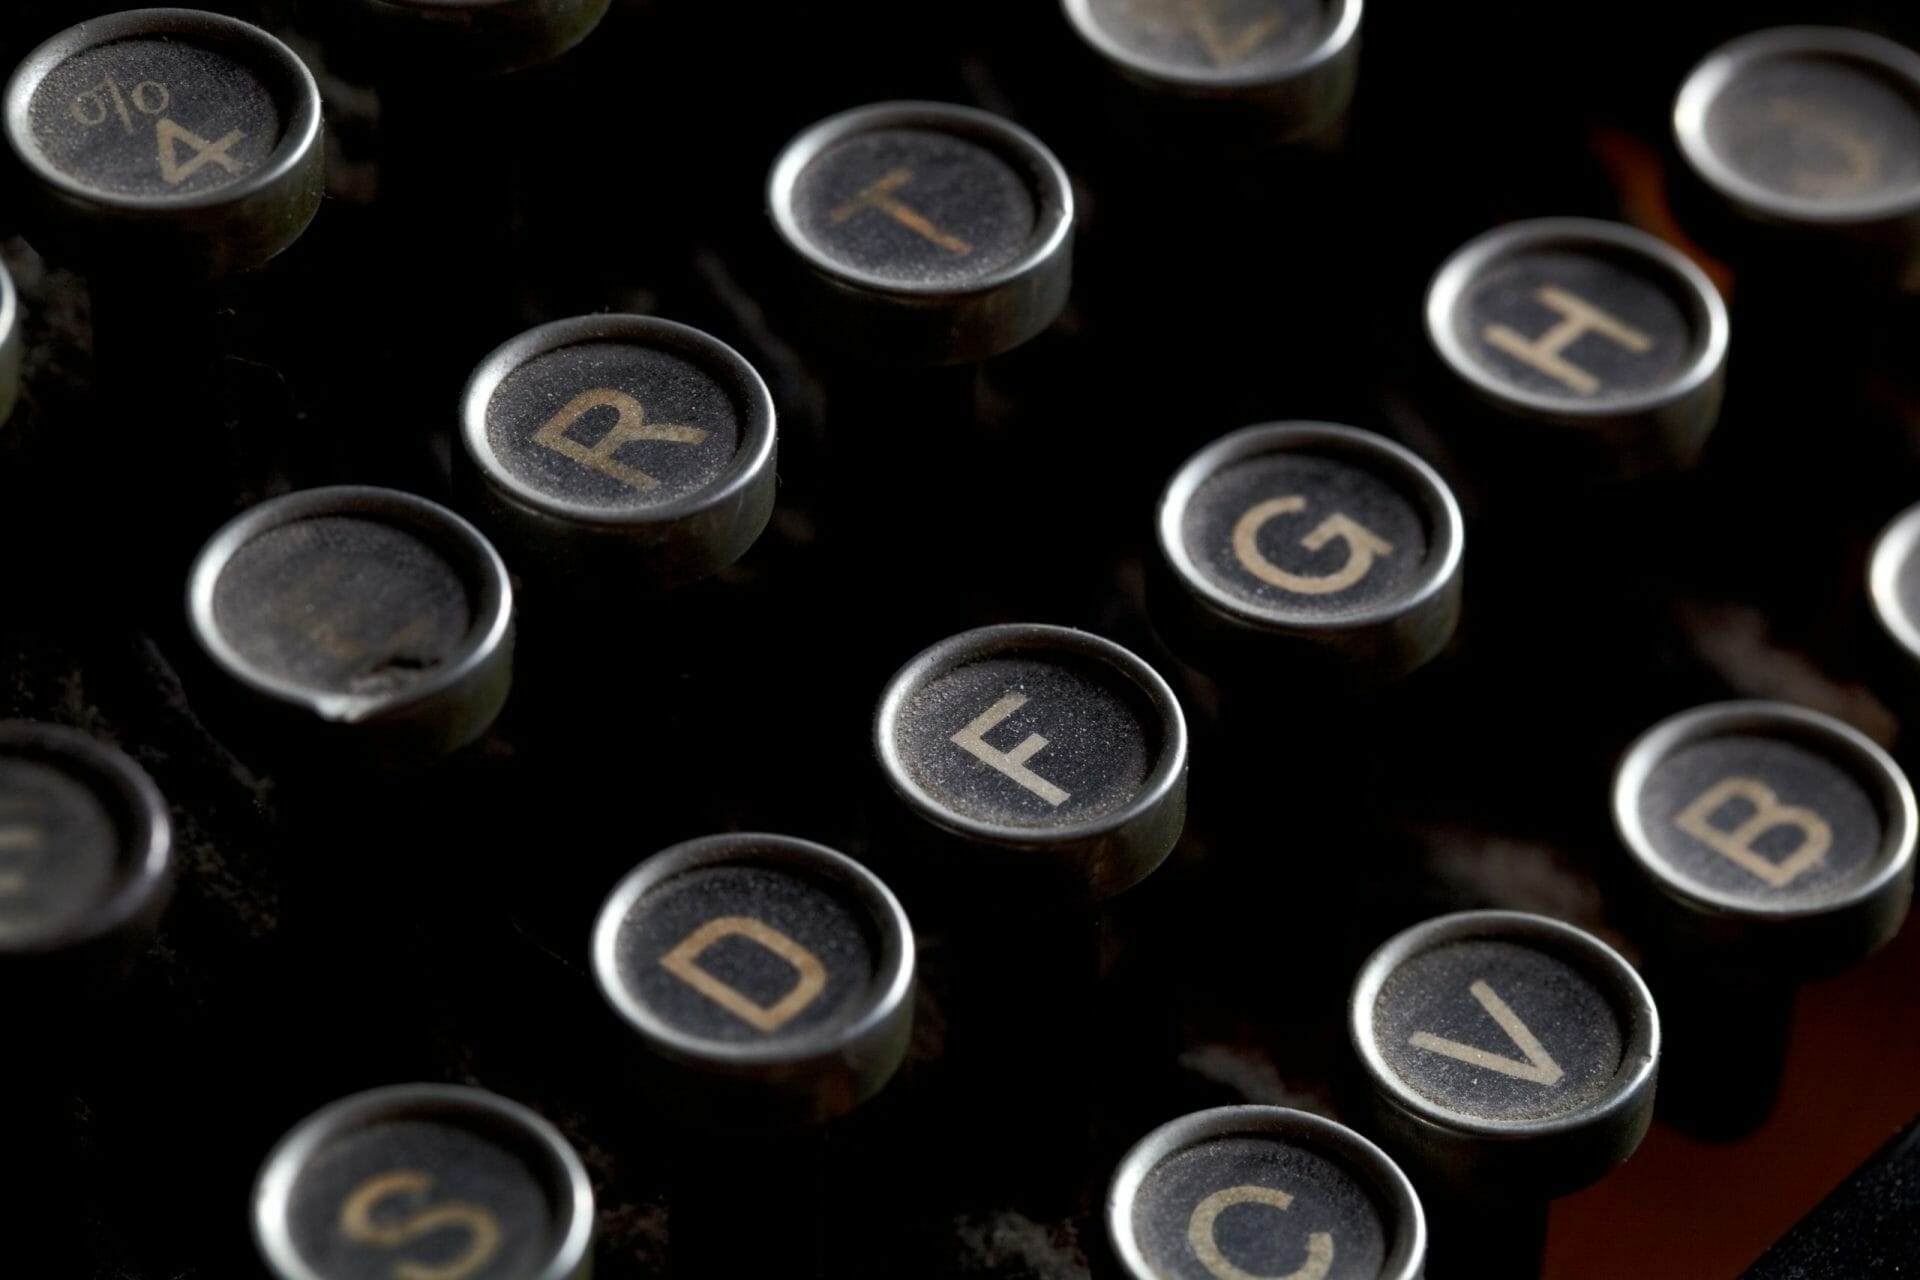 Close up photo of antique typewriter keys with dust, shallow focus